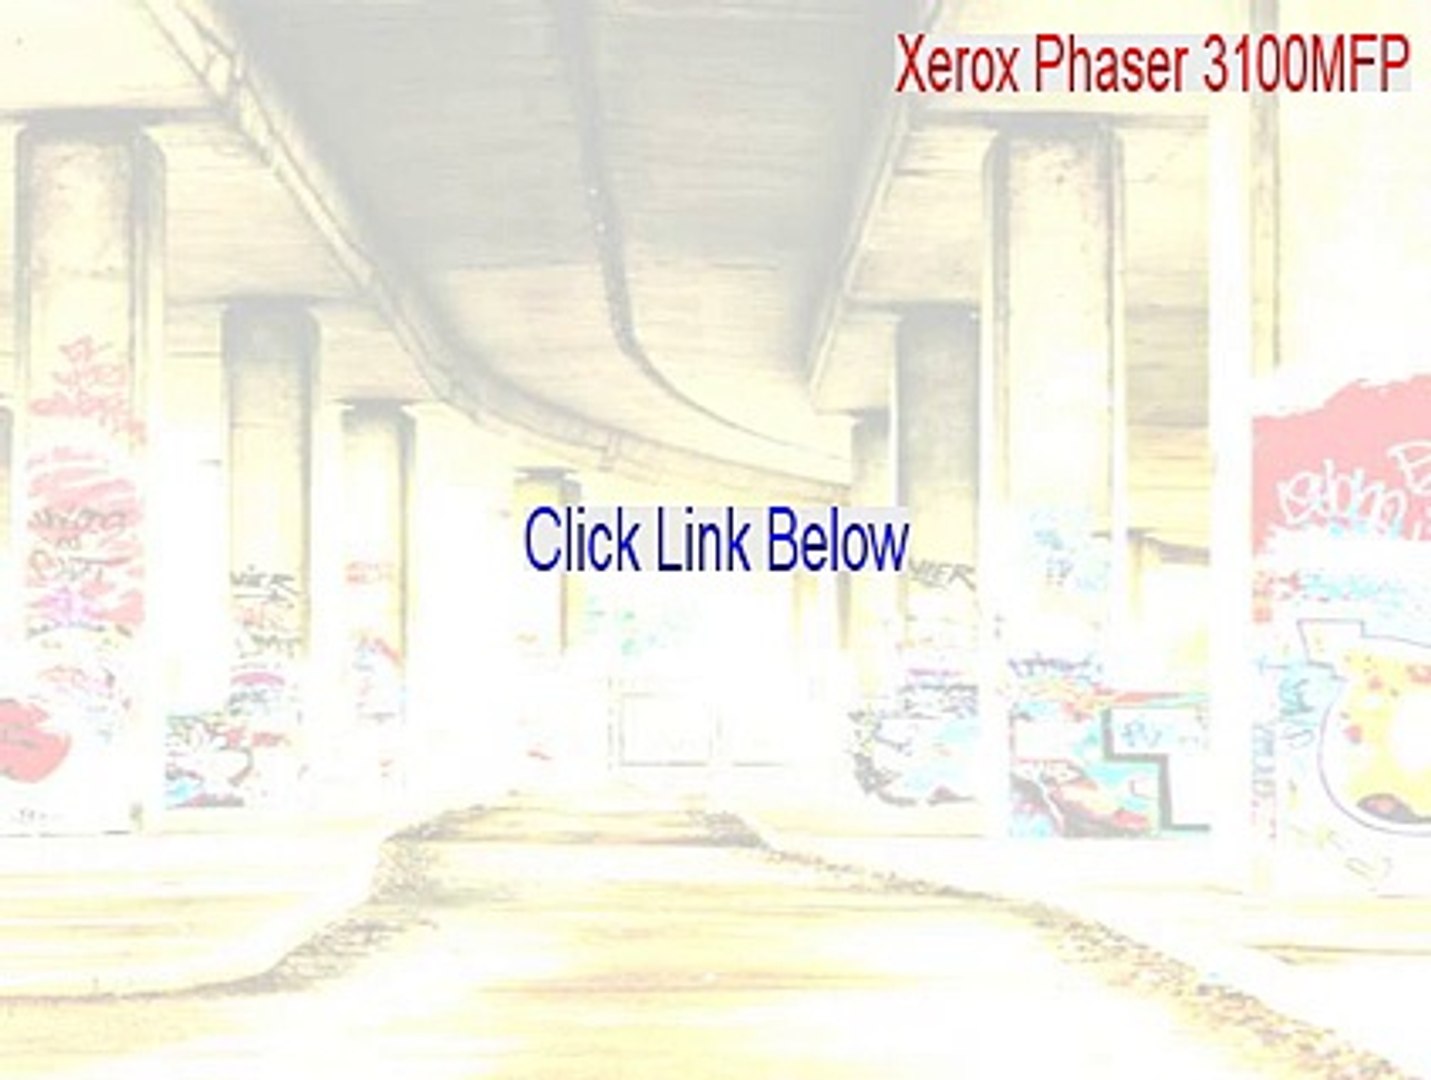 Xerox Phaser 3100mfp Crack Xerox Phaser 3100mfpxerox Phaser 3100mfp 2015 Video Dailymotion